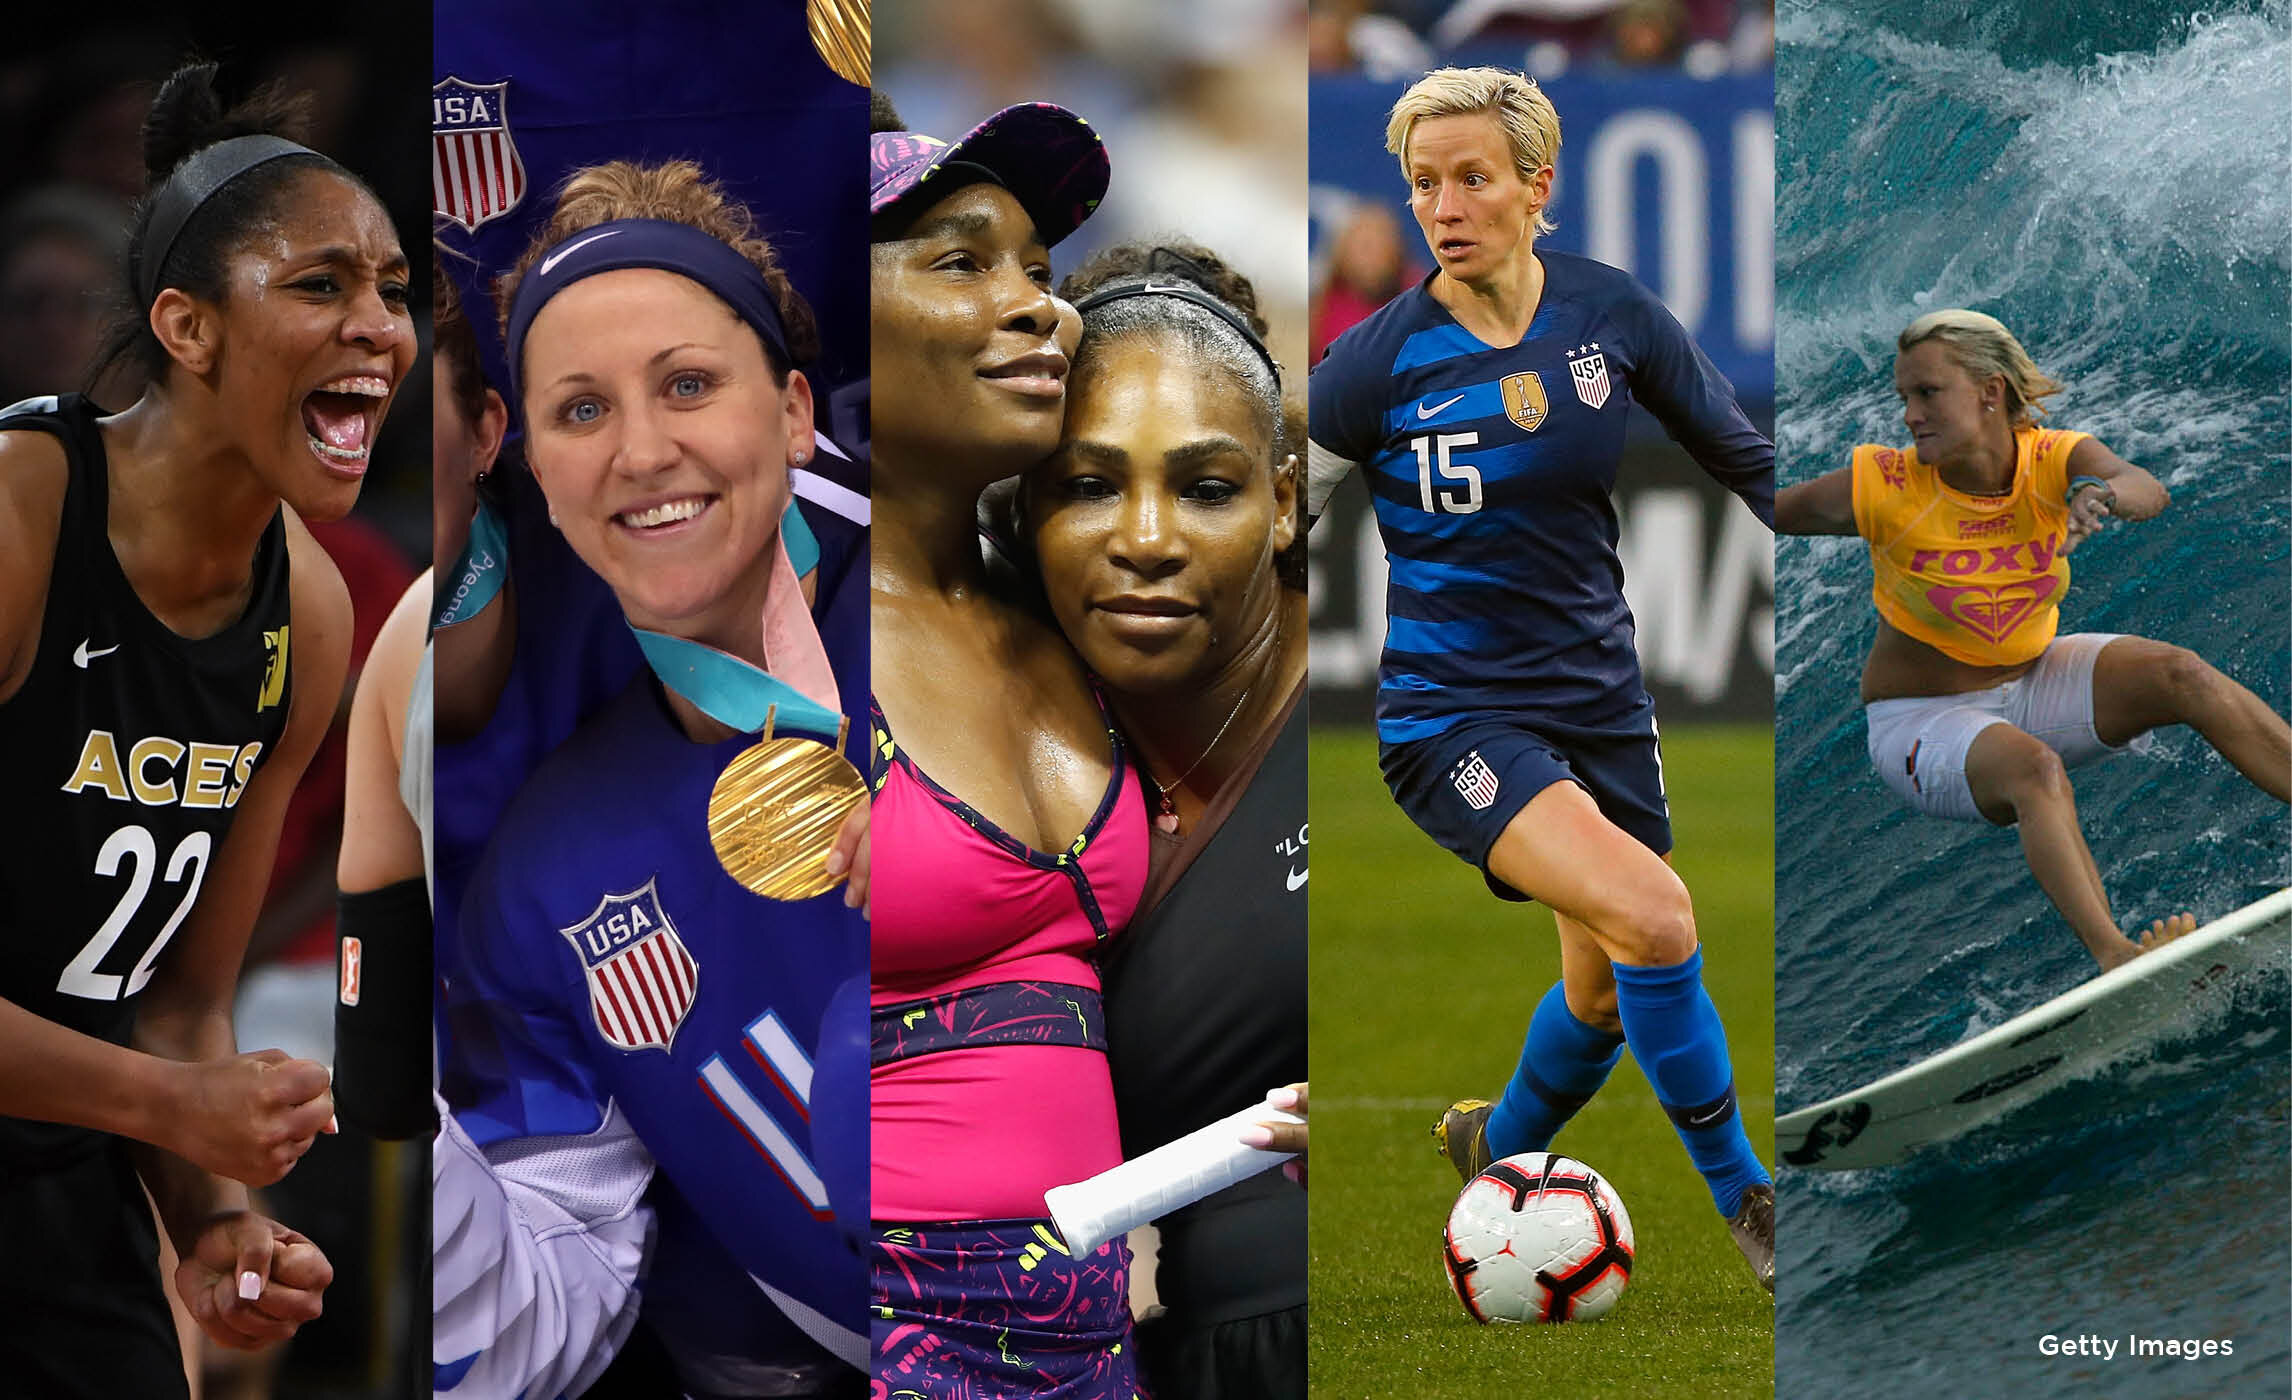 women's olympic sports Experiment: Good or Bad?